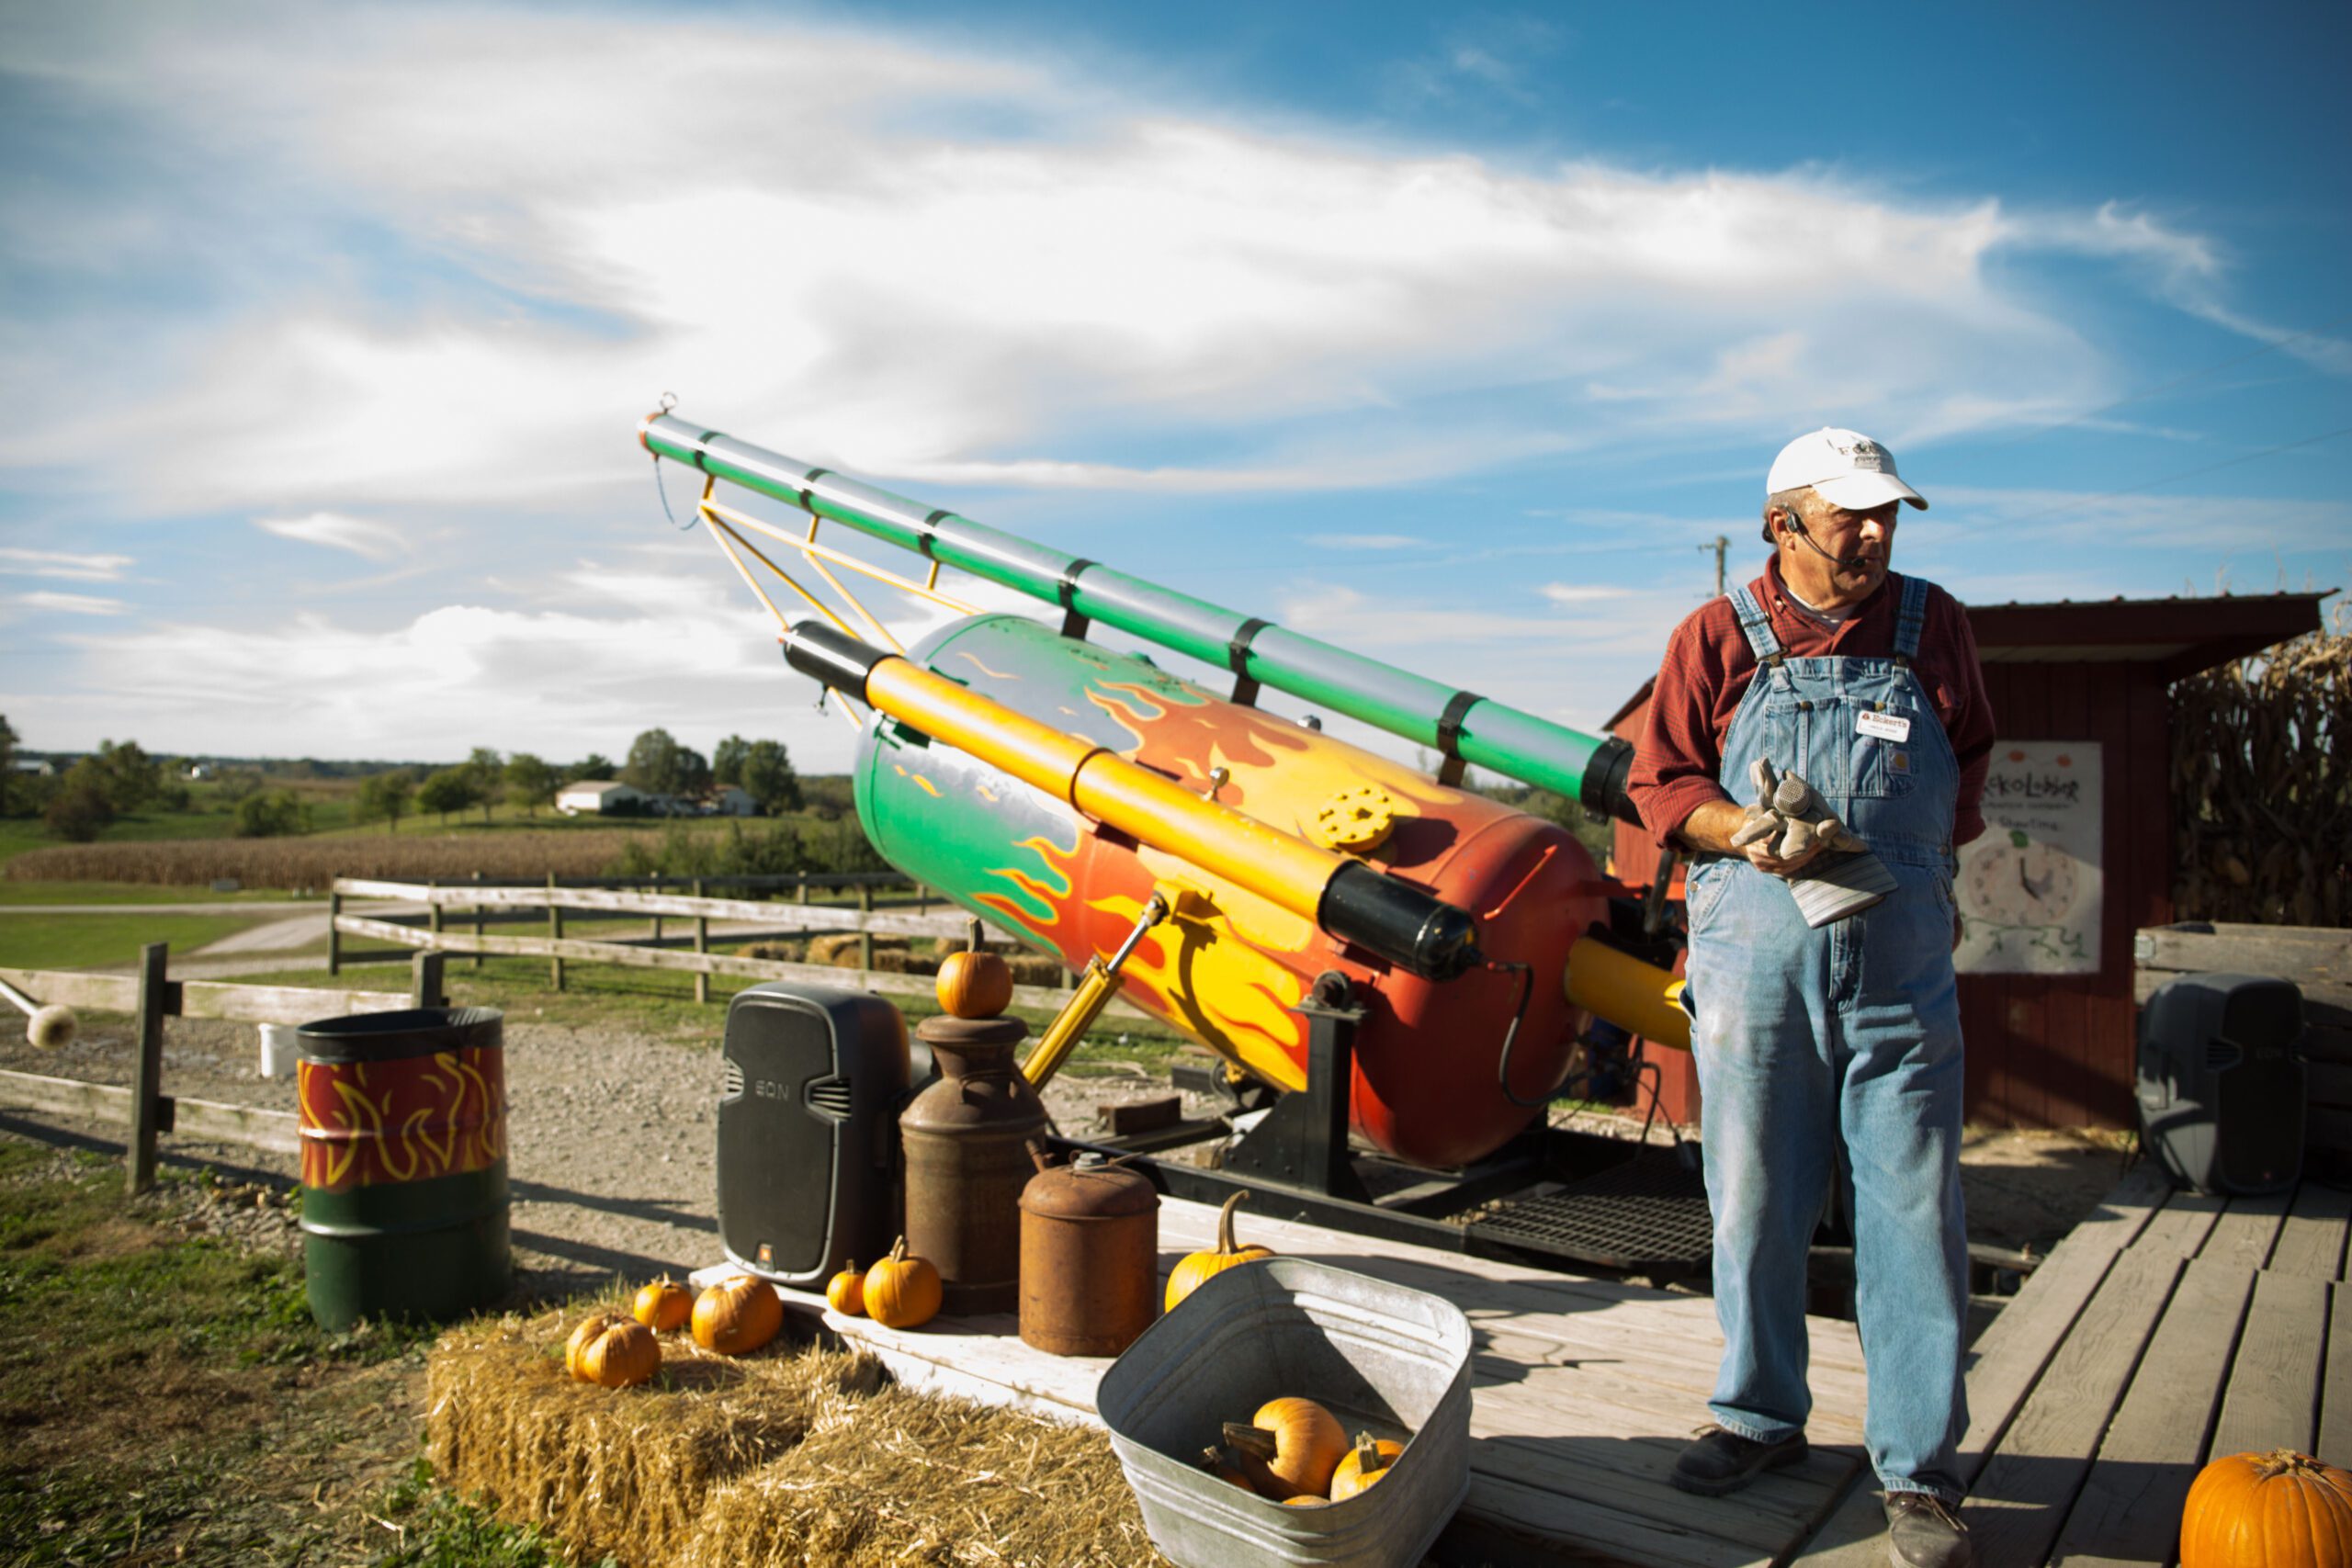 An individual stands beside a colorful pumpkin cannon on a sunny day with a clear sky.